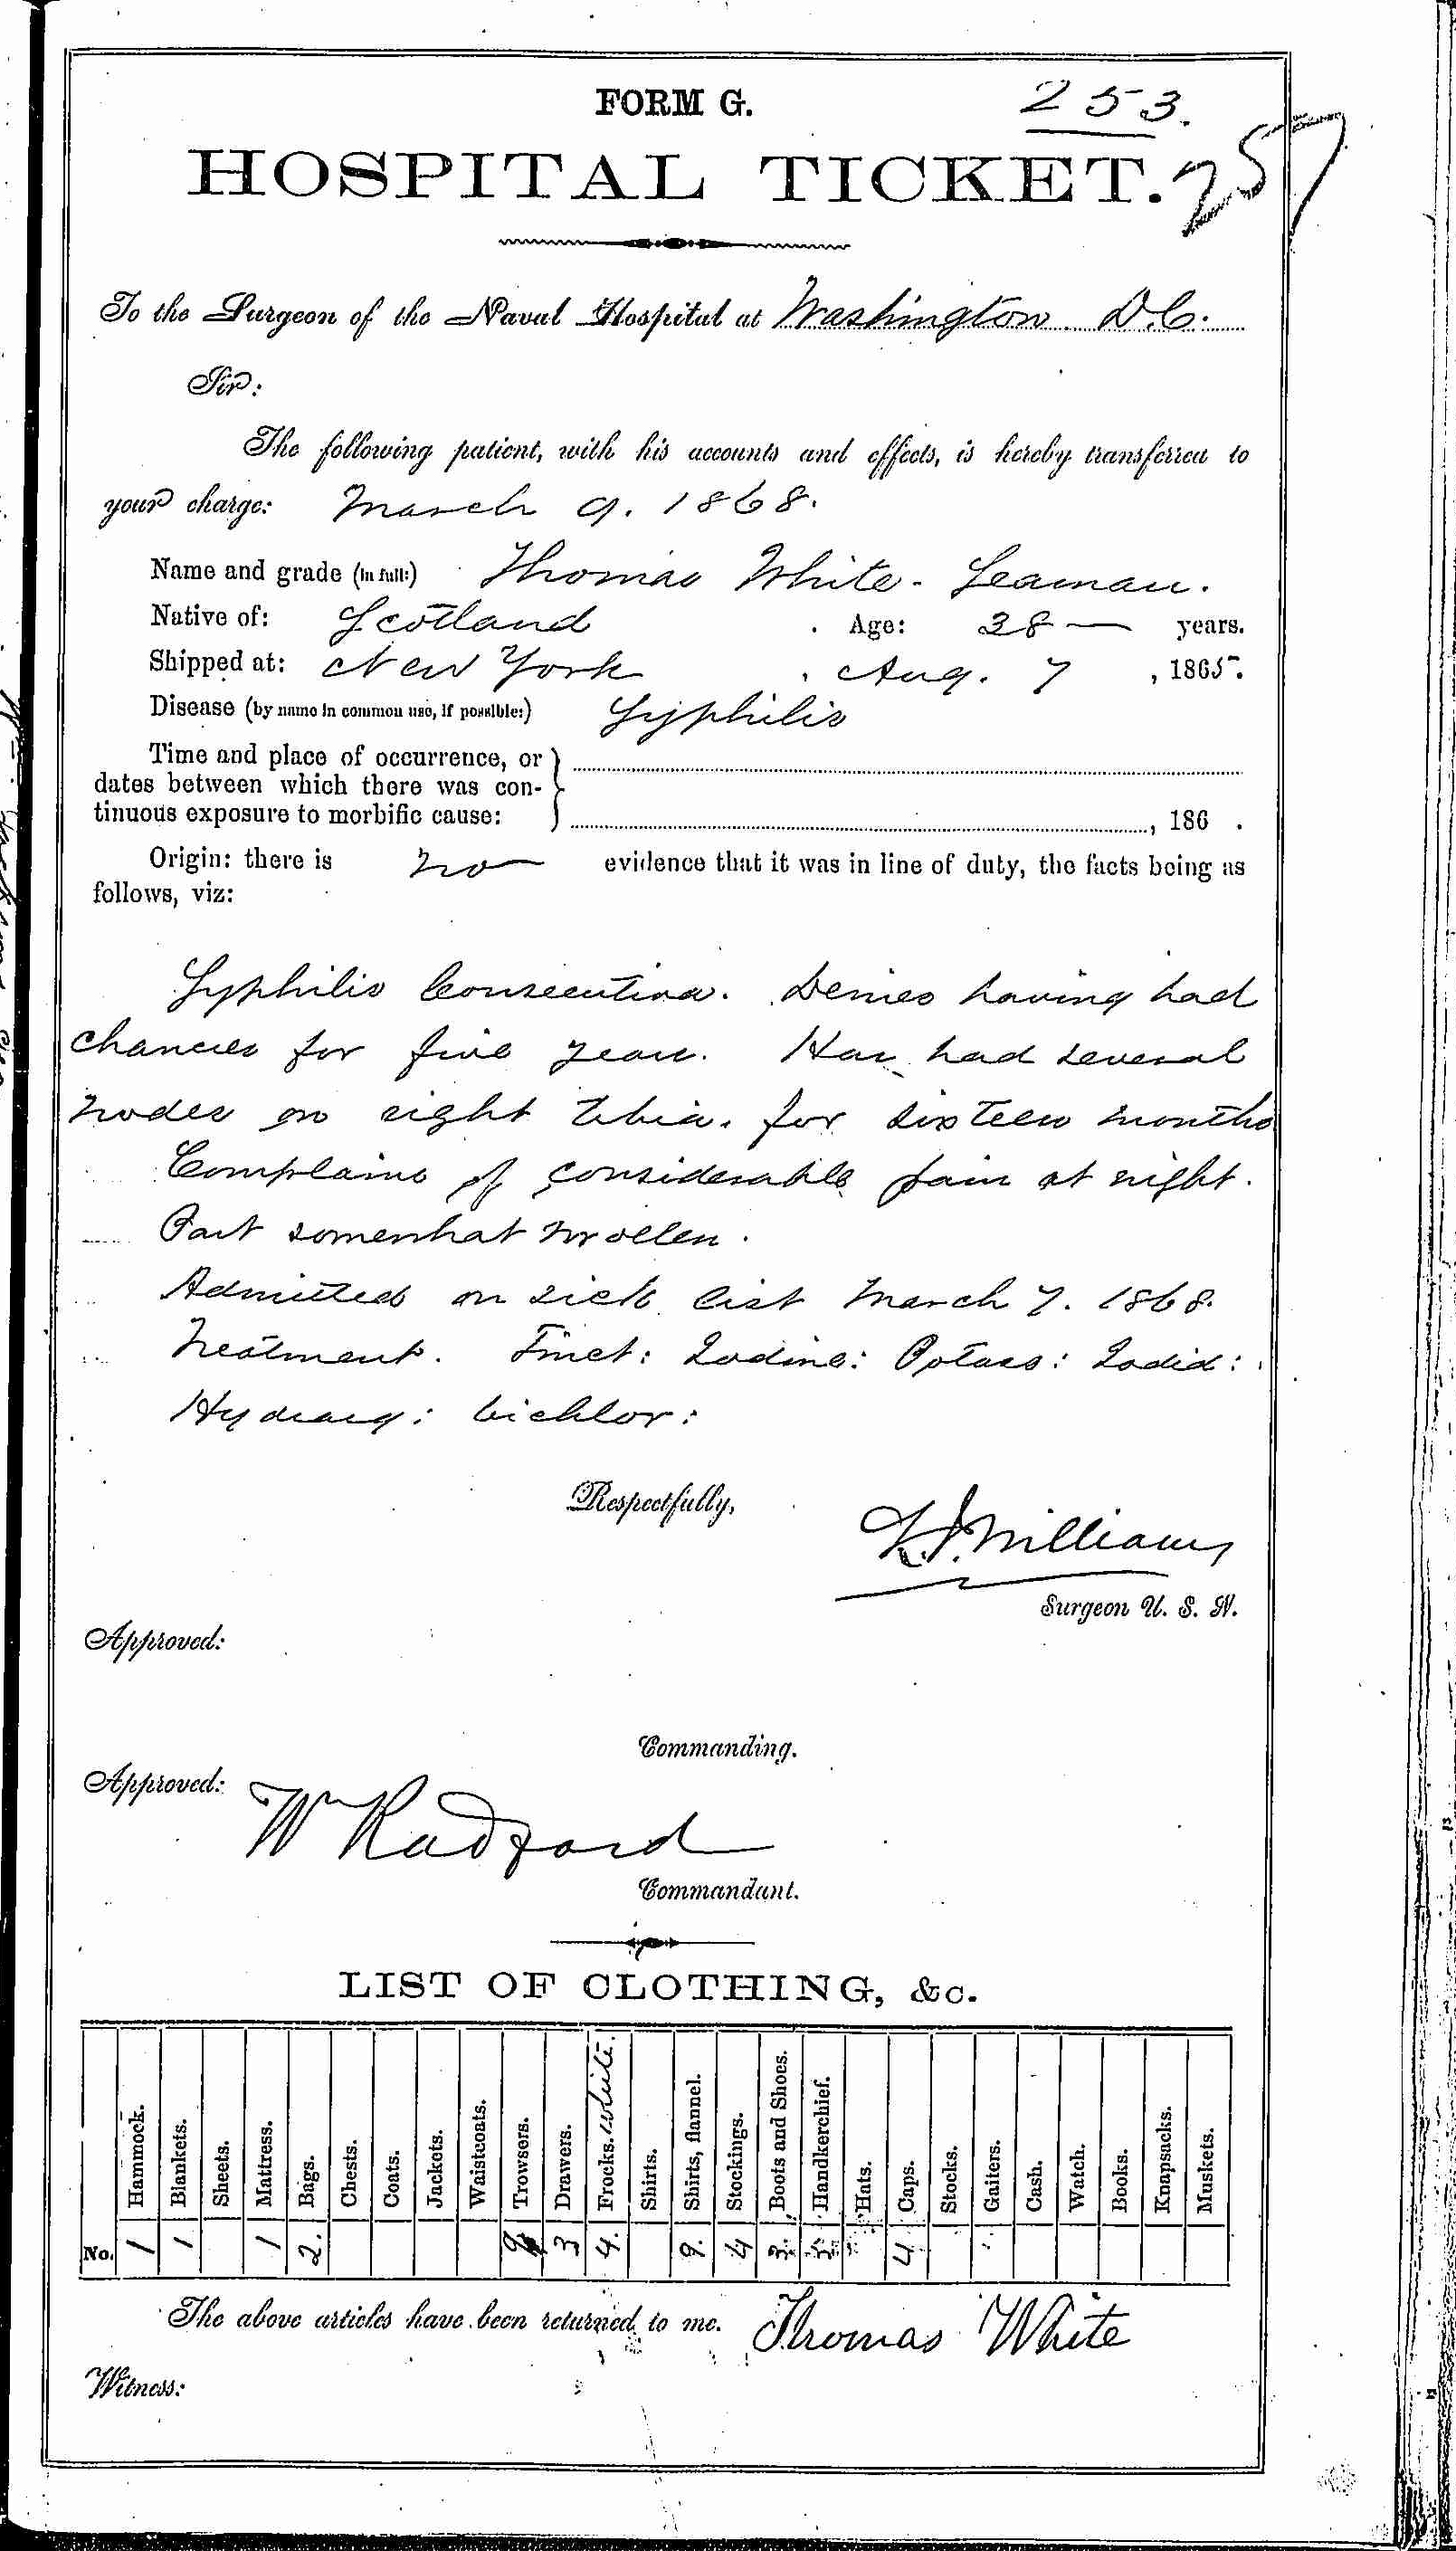 Entry for Thomas White (second admission page 1 of 2) in the log Hospital Tickets and Case Papers - Naval Hospital - Washington, D.C. - 1866-68